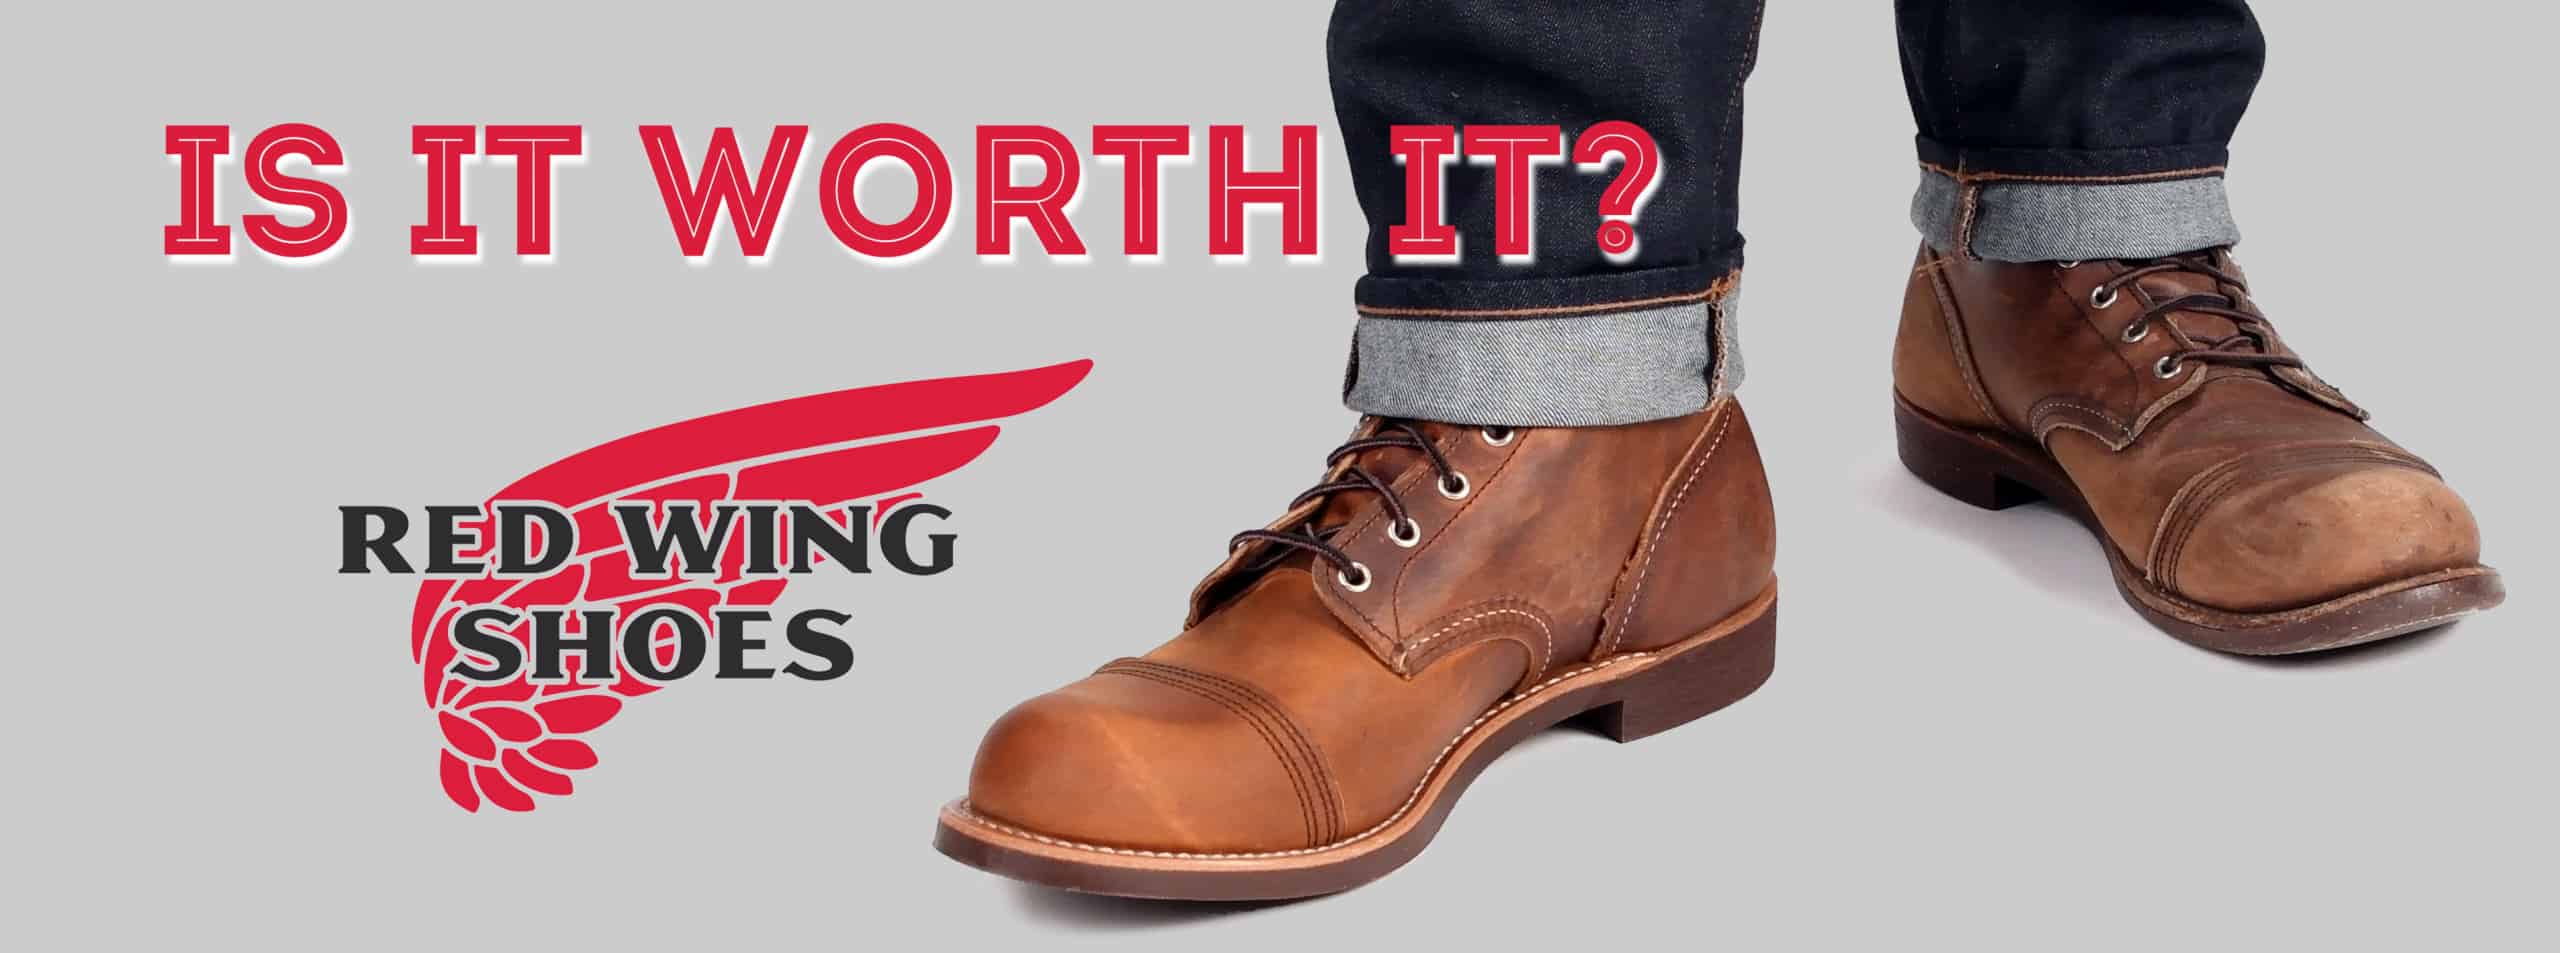 red wing shoe store coupons